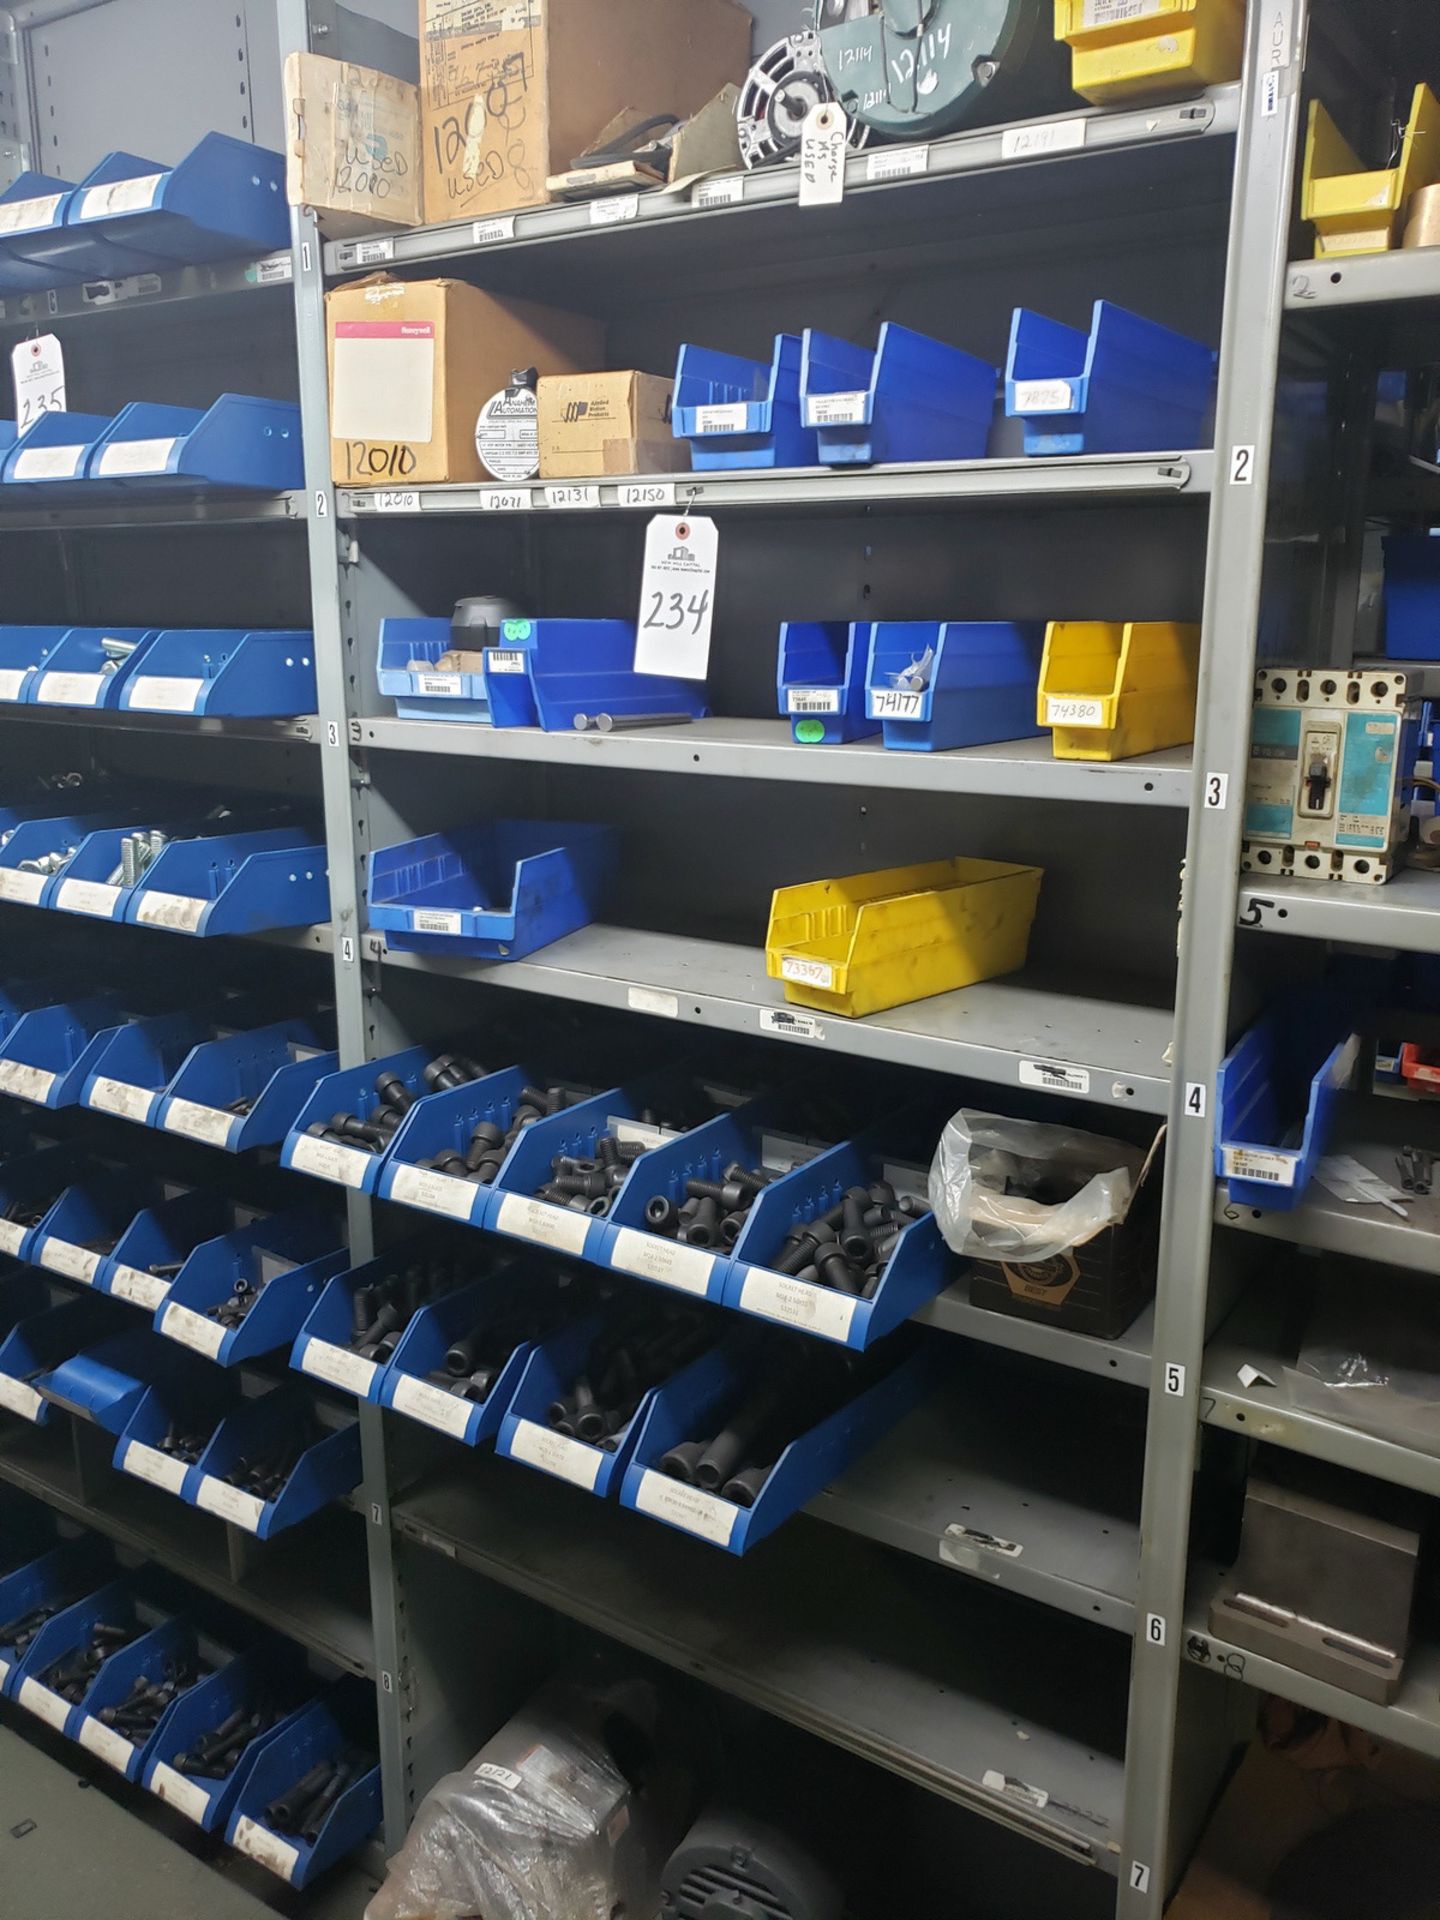 Contents of Shelving Section, Spare Parts & Supplies - Subj to Bulk | Rig Fee $50 (parts only)